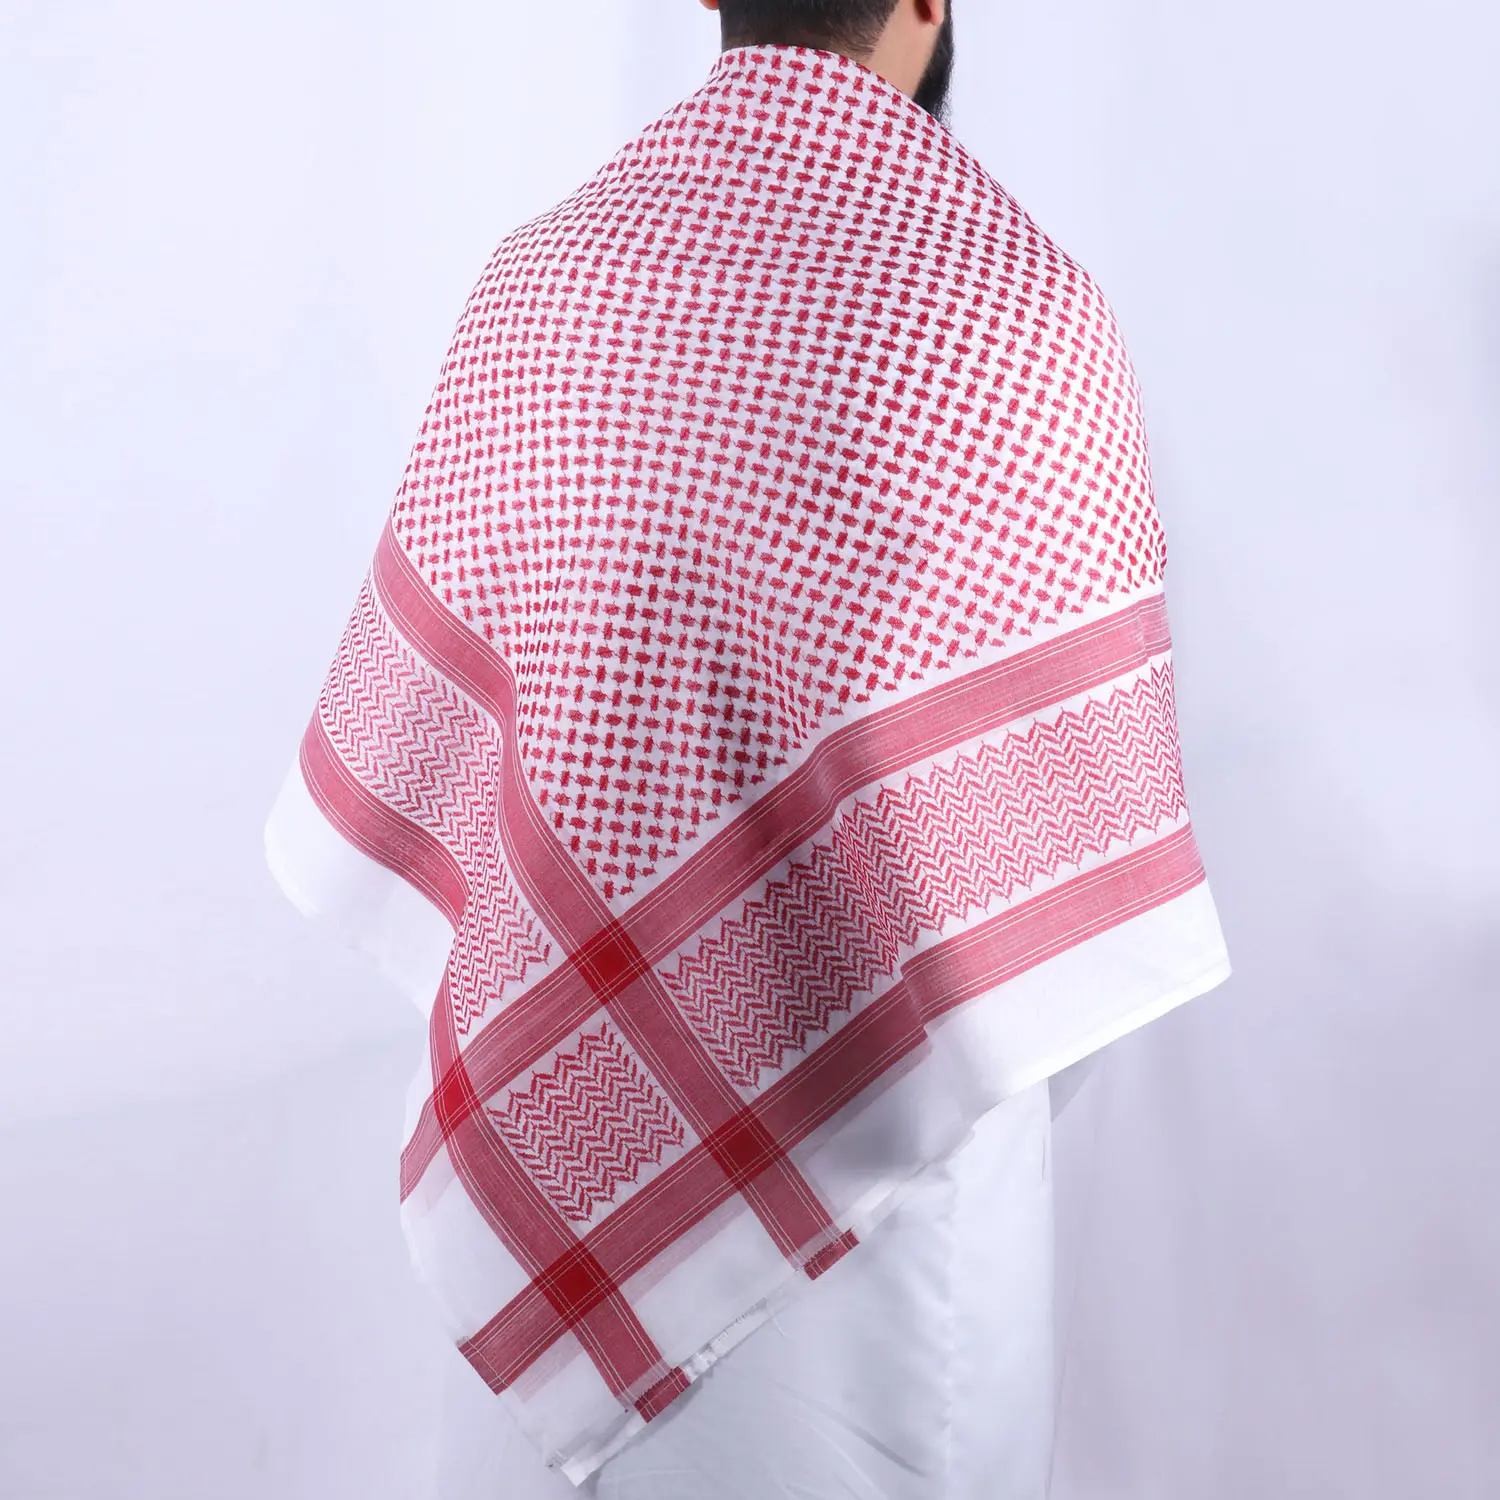 Adulte Saoudien Palestine Keffieh Rouge Shemagh Arabe Premium Wrap Musulman Couvre-chef Foulard Pour Hommes